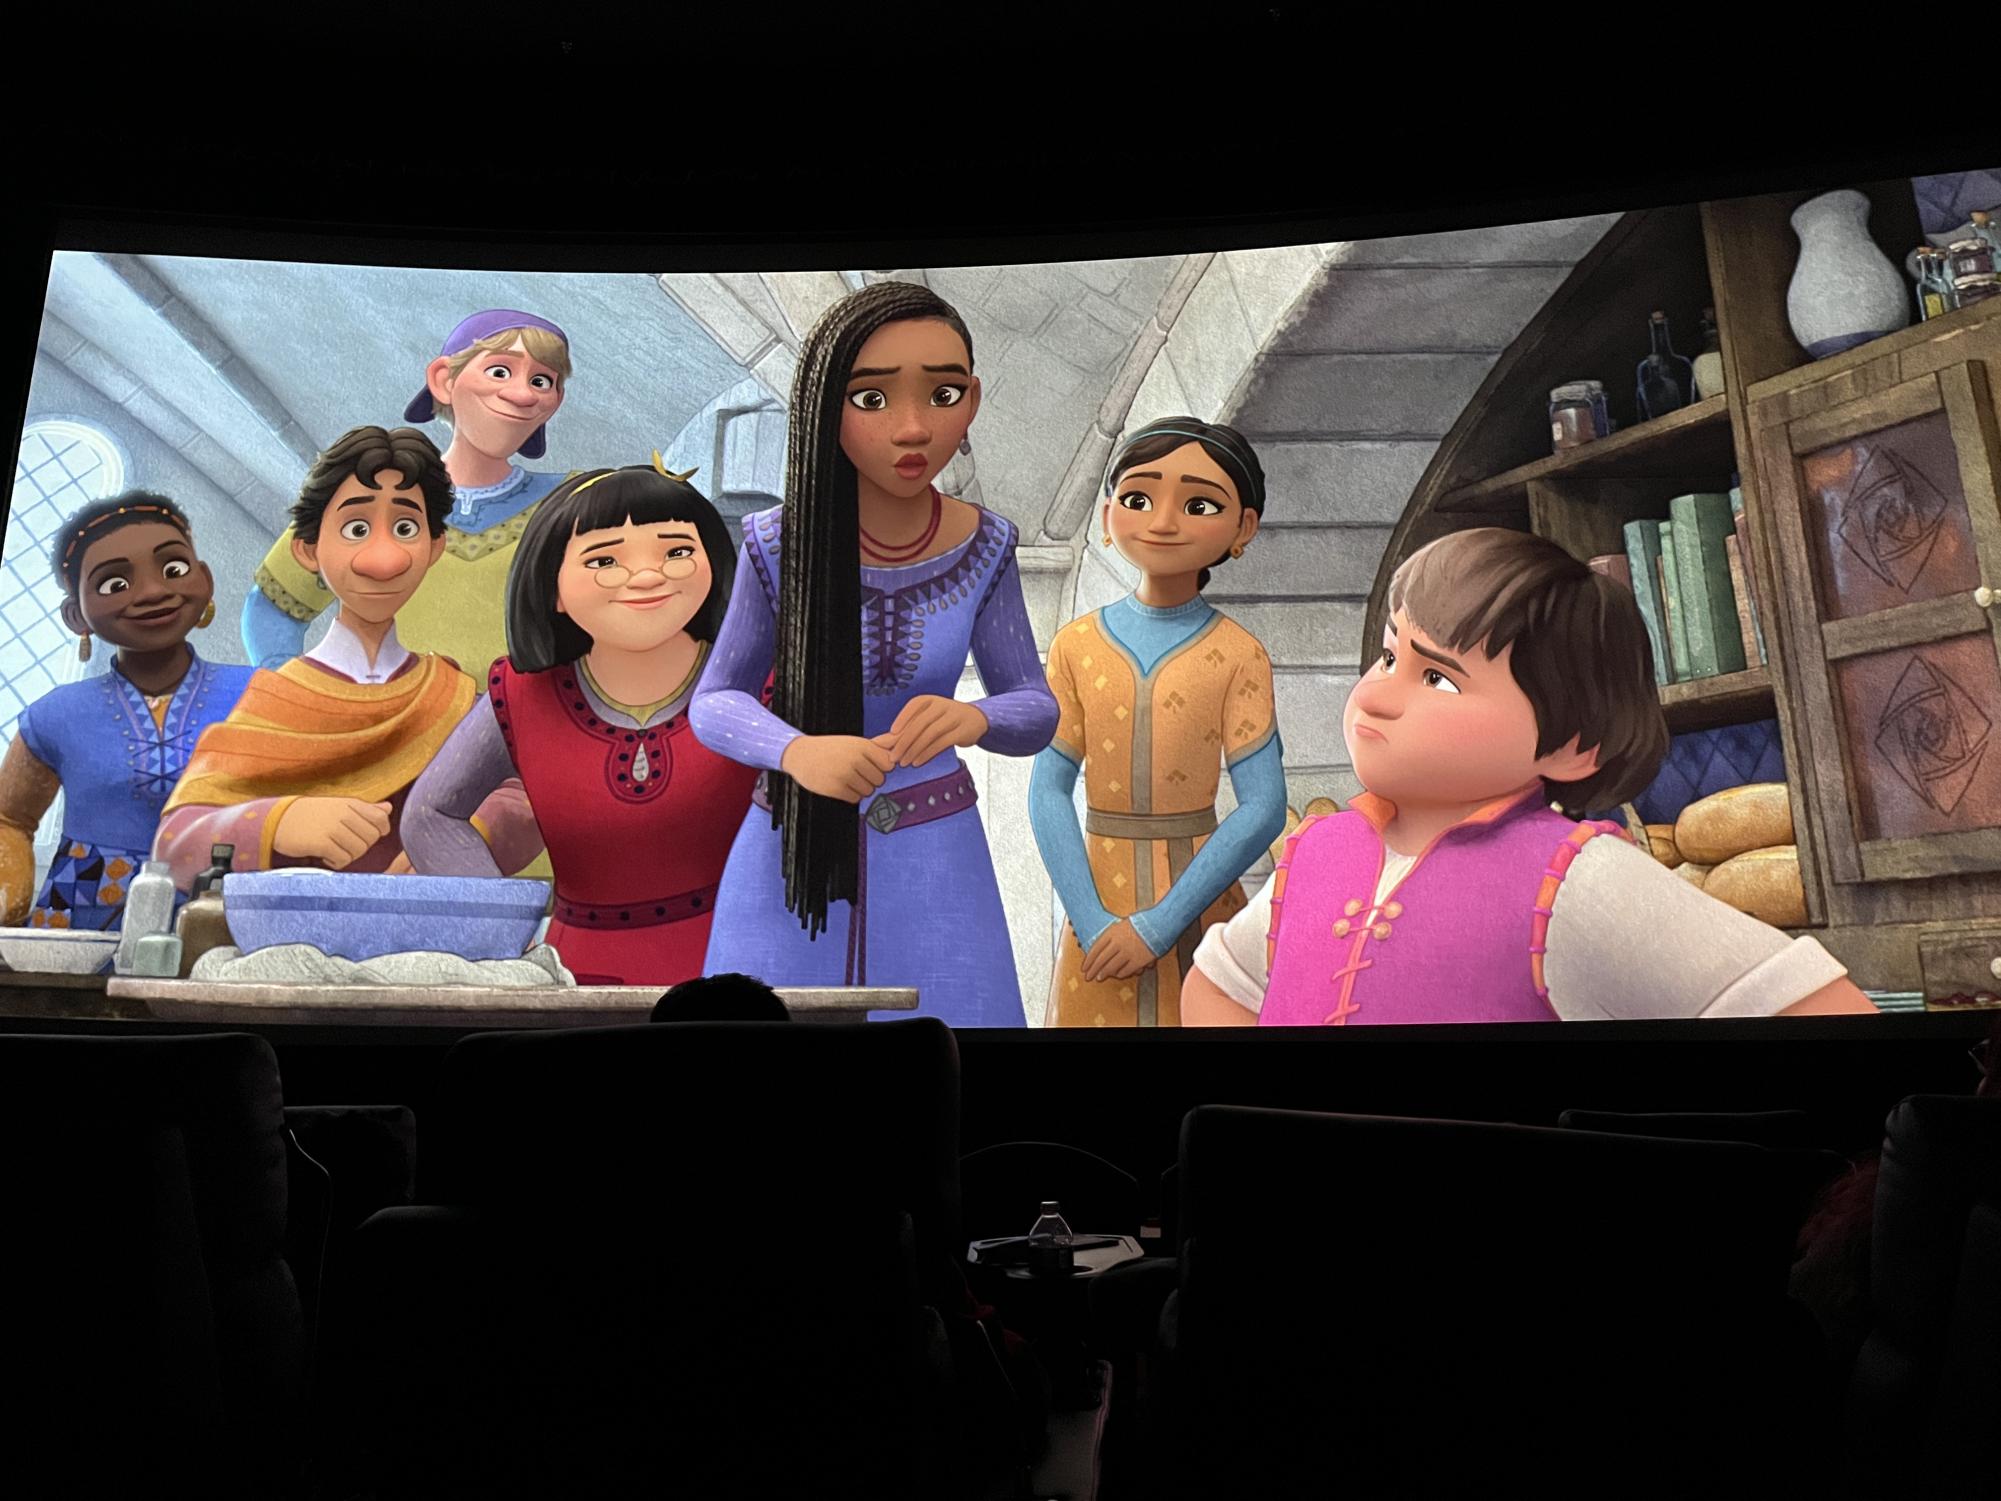 Asha (middle) and all of her kingdom friends are shown in the movie Wish, which shows a wide diversity of characters. 
